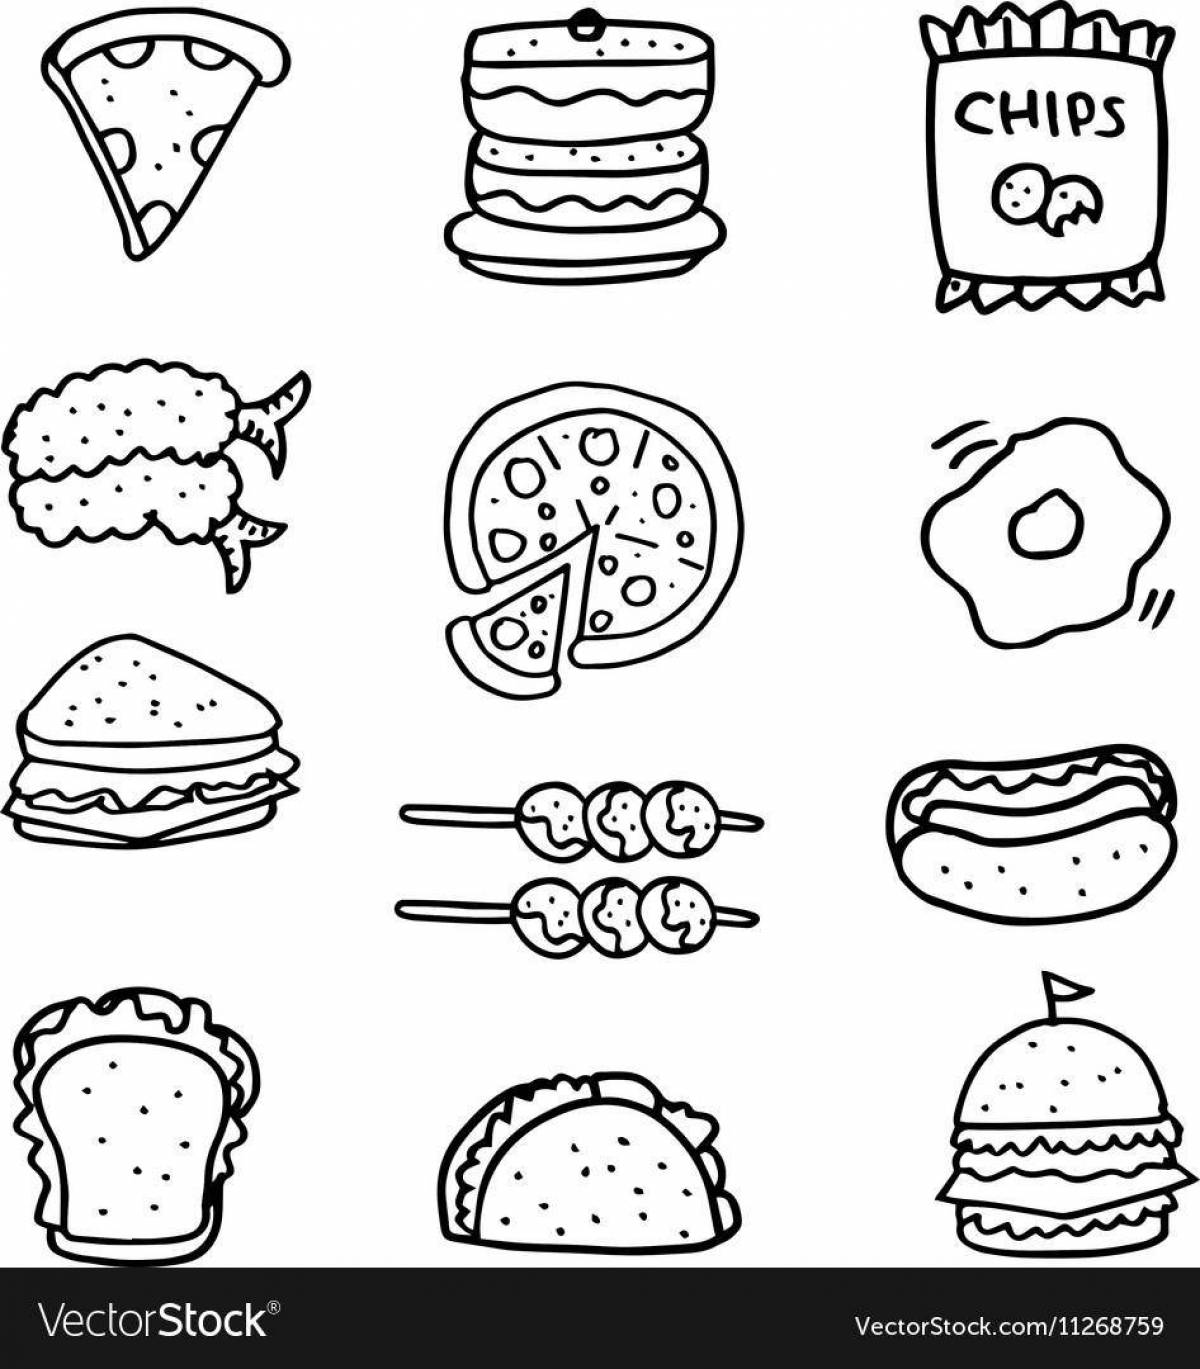 Cute duck food lalafanfan coloring page